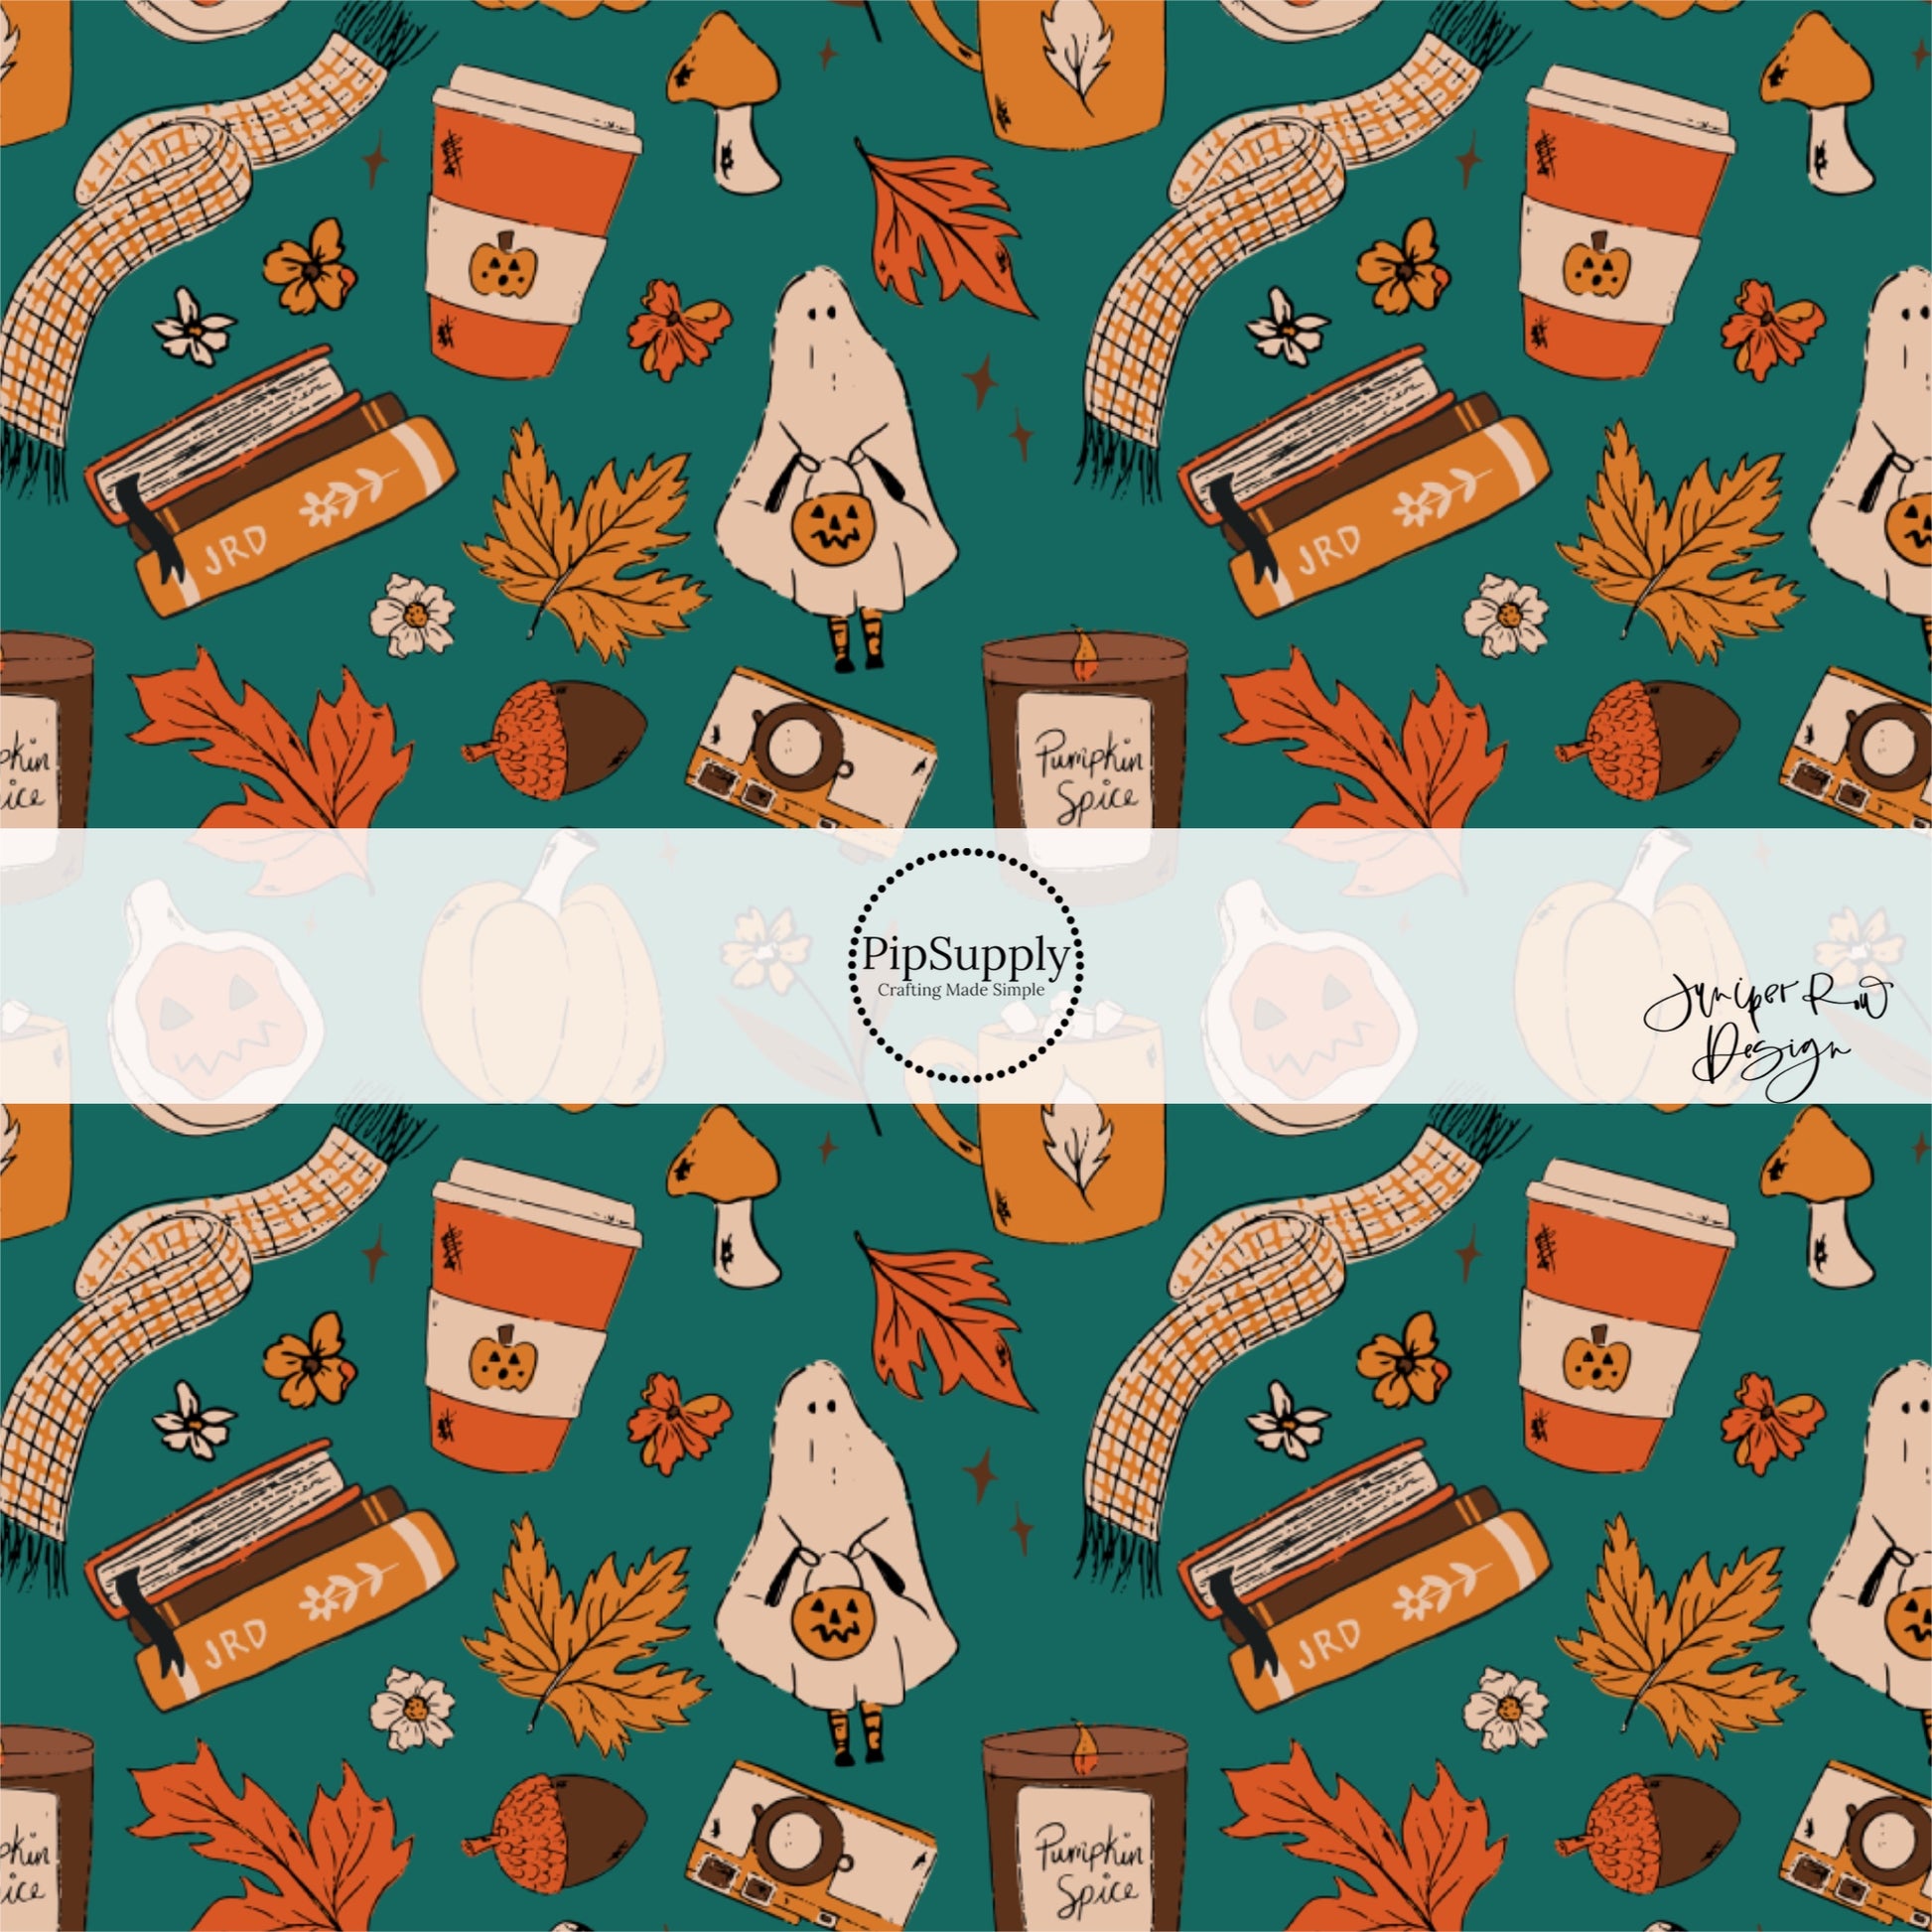 Teal fabric by the yard with fall and Halloween prints and designs such as film cameras, ghosts, scarves, leaves, books, and candles.